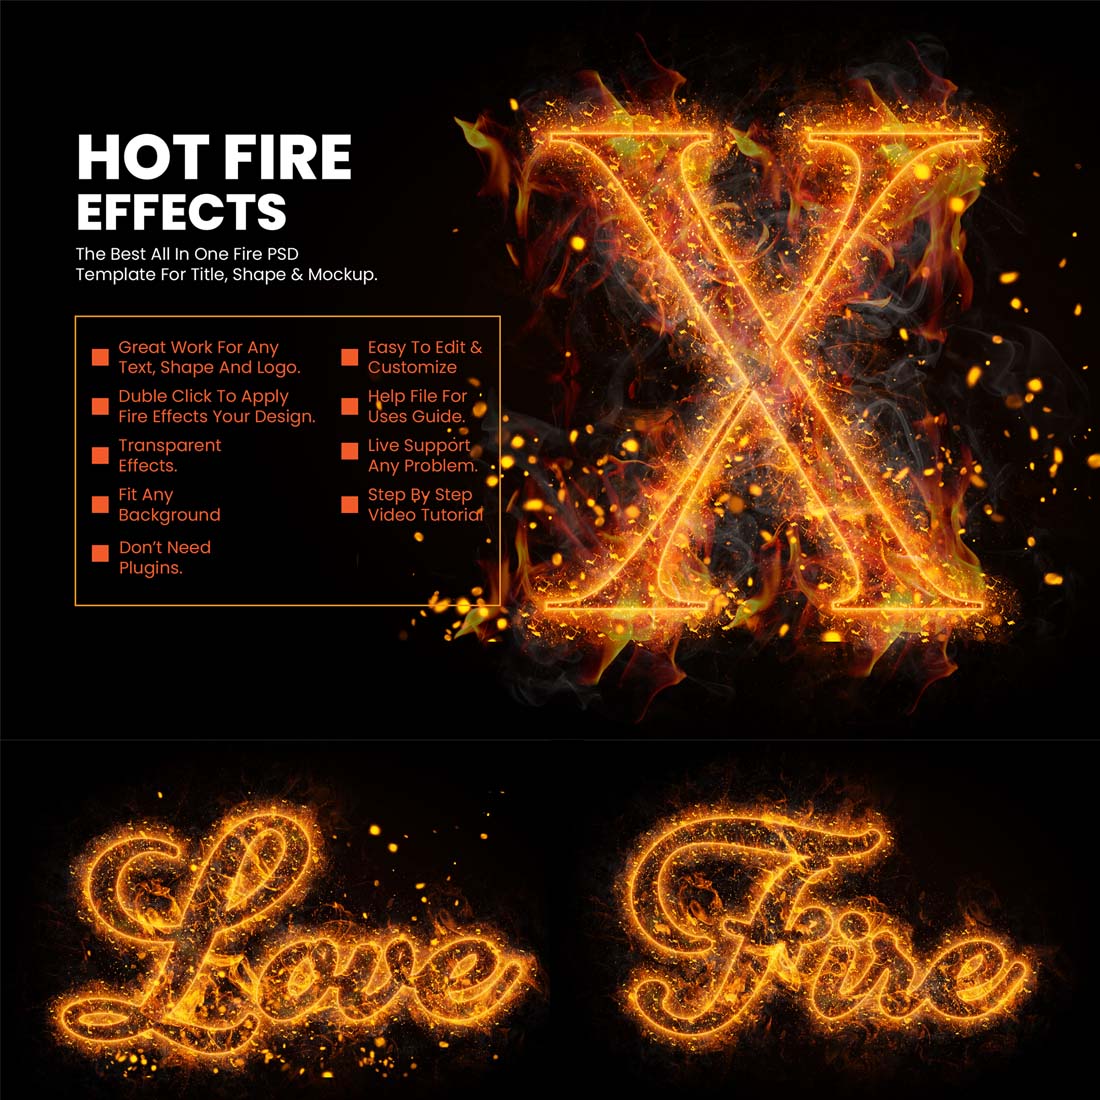 Fire Shape, Text & Logo Effect cover image.